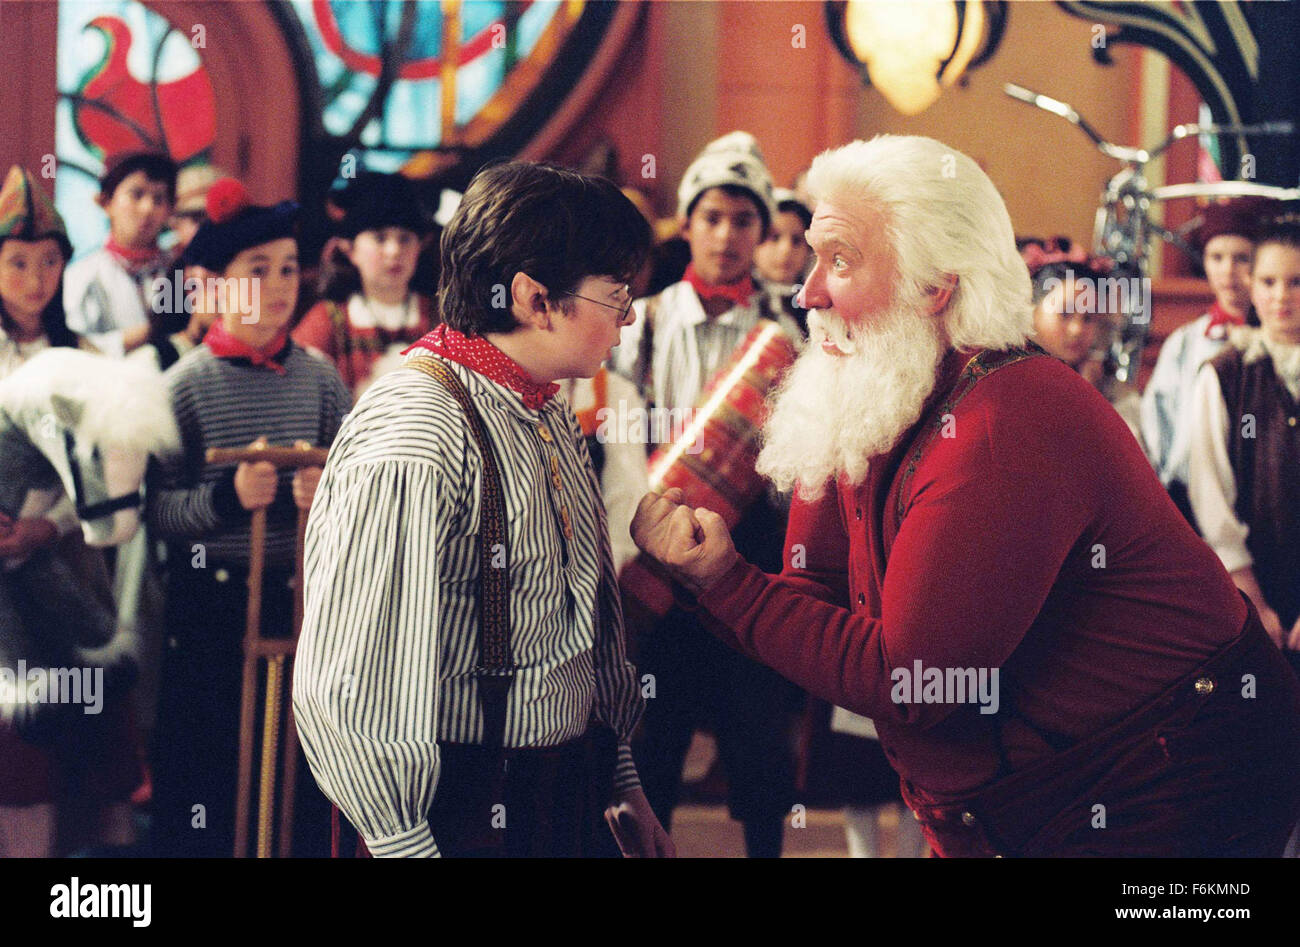 RELEASE DATE: November 3, 2006. MOVIE TITLE: Santa Clause 3: The Escape Clause. STUDIO: Walt Disney Pictures. PLOT: Santa (Allen), aka Scott Calvin, is faced with double-duty: how to keep his new family happy, and how to stop Jack Frost from taking over Christmas. PICTURED: SPENCER BRESLIN as Curtis and TIM ALLEN as Santa / Scott Calvin. Stock Photo